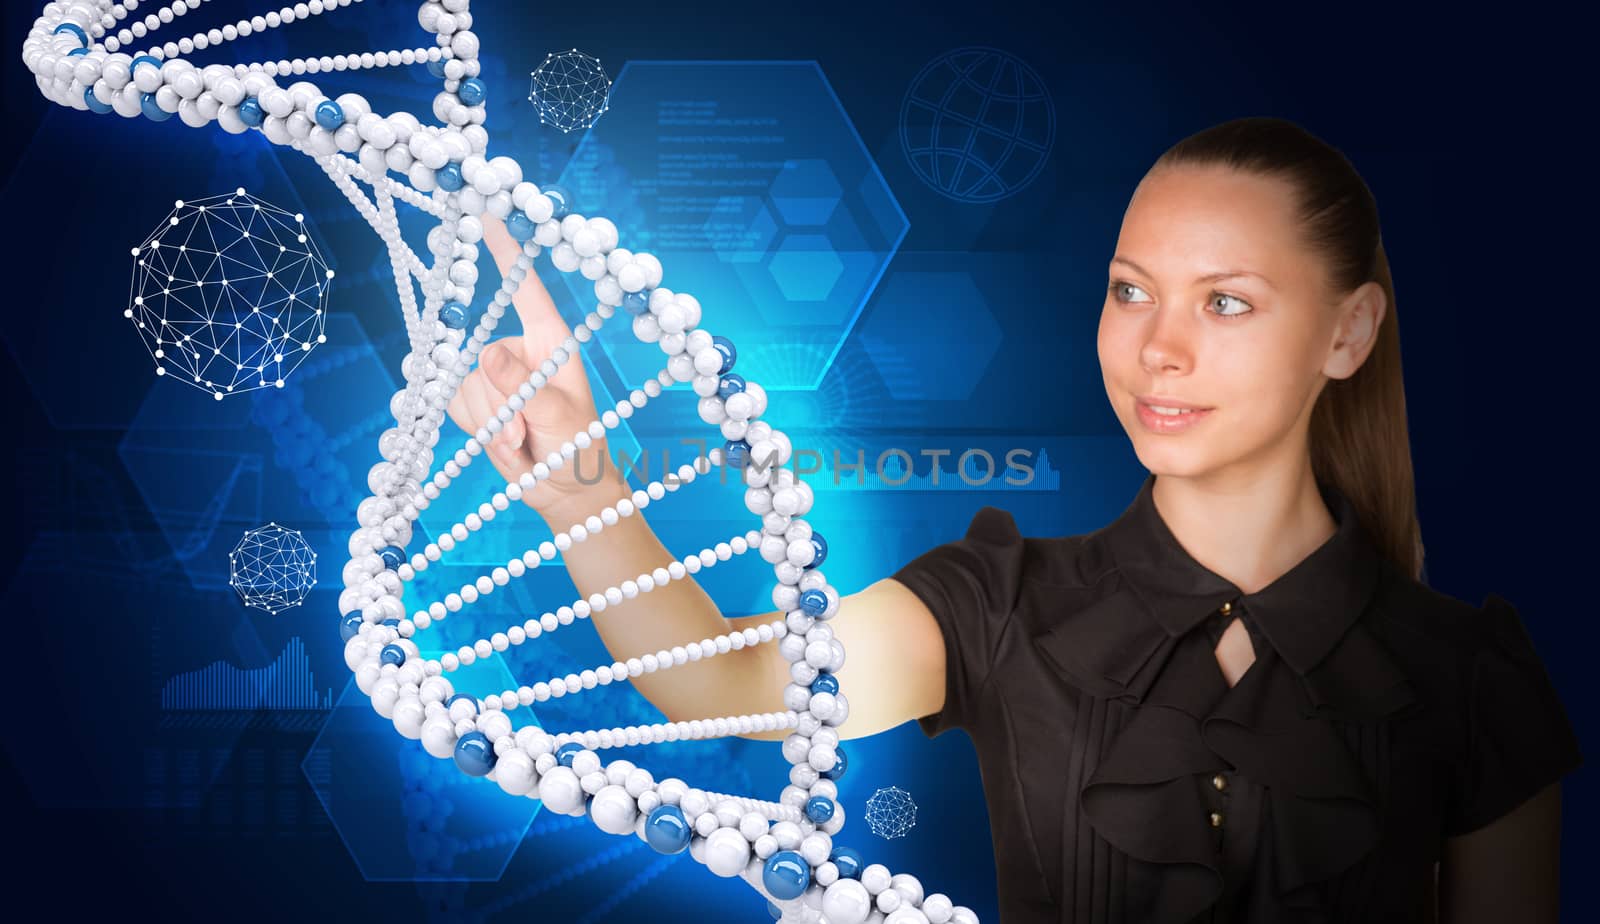 Beautiful businesswoman in dress smiling and presses finger on model of DNA. Scientific and medical concept